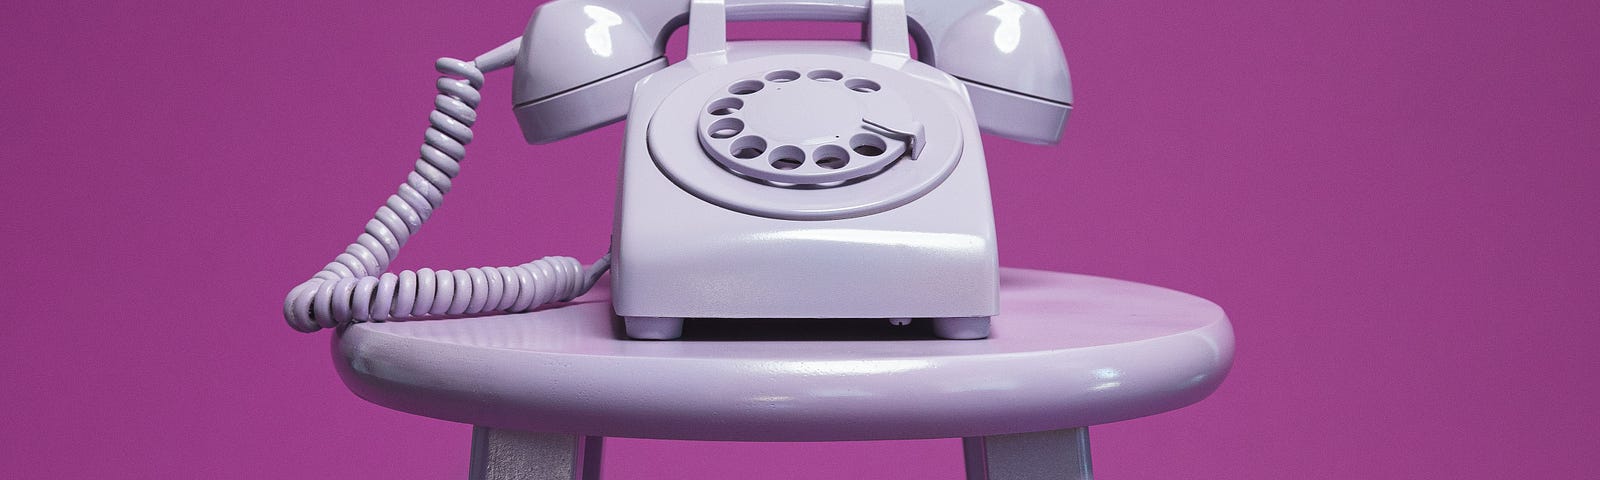 Old-style, white rotary phone atop white stool against purple background